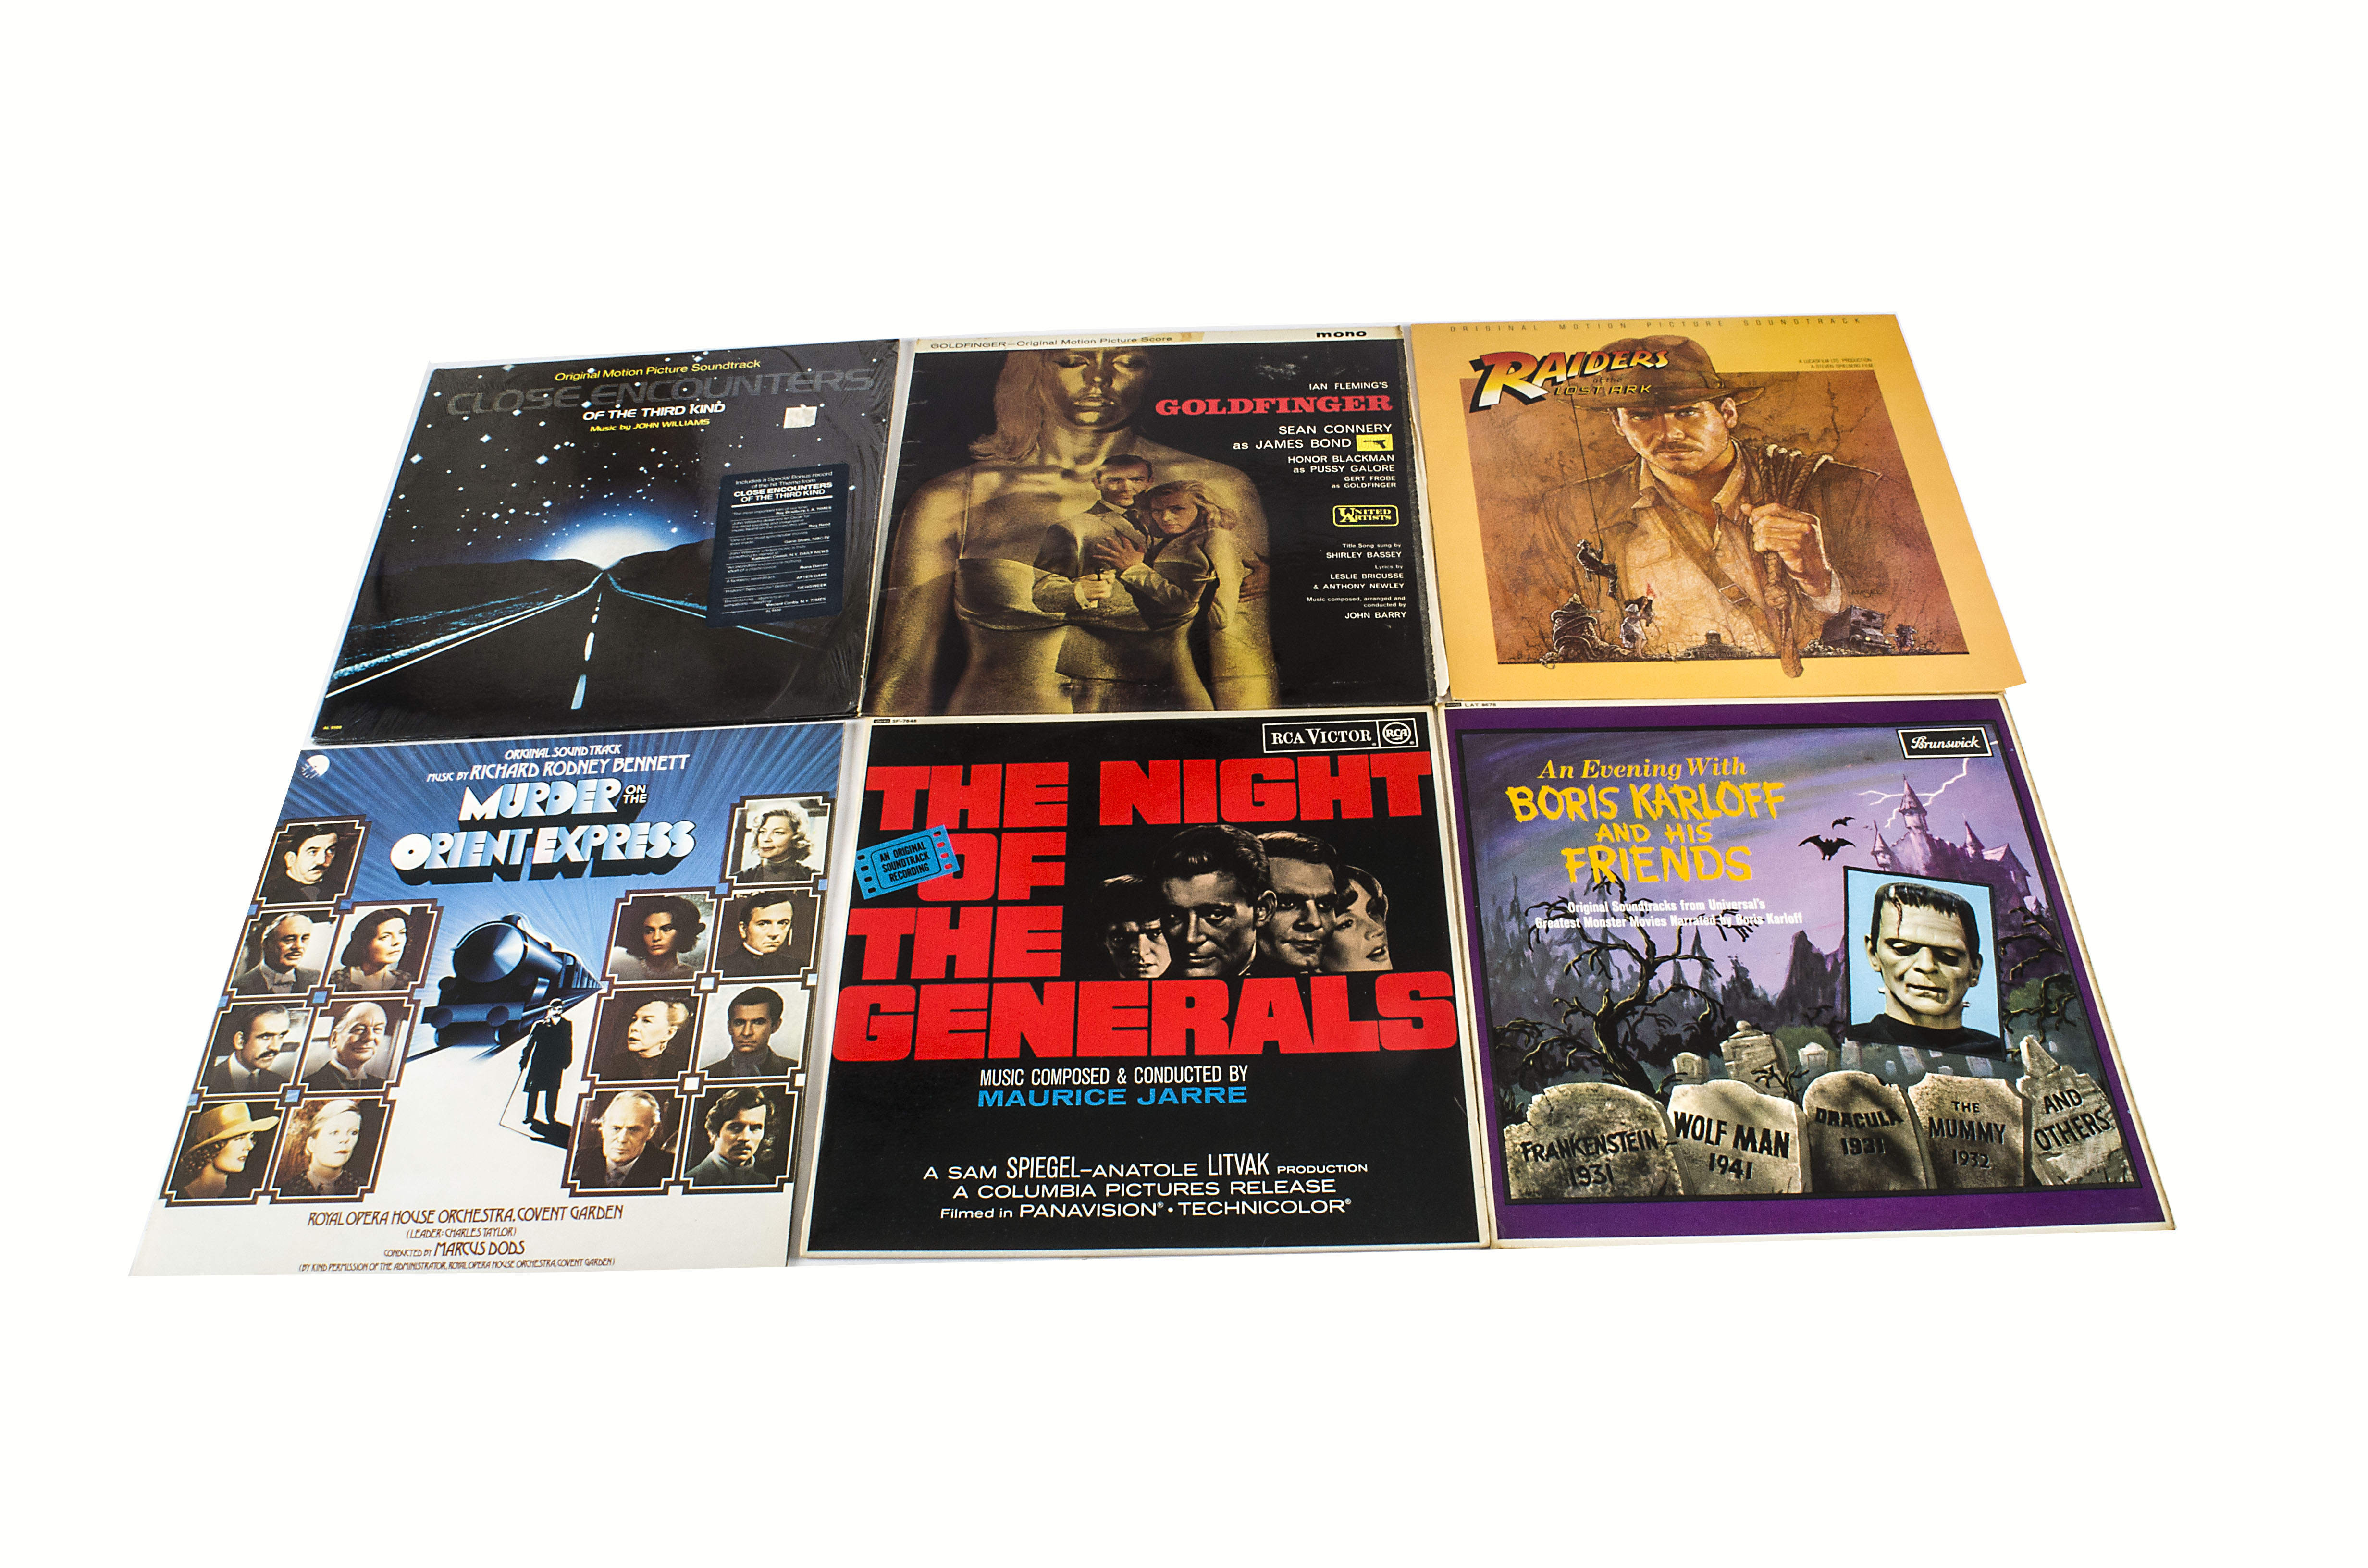 Soundtrack LPs, approximately forty albums of mainly Soundtracks including Goldfinger, Raiders of